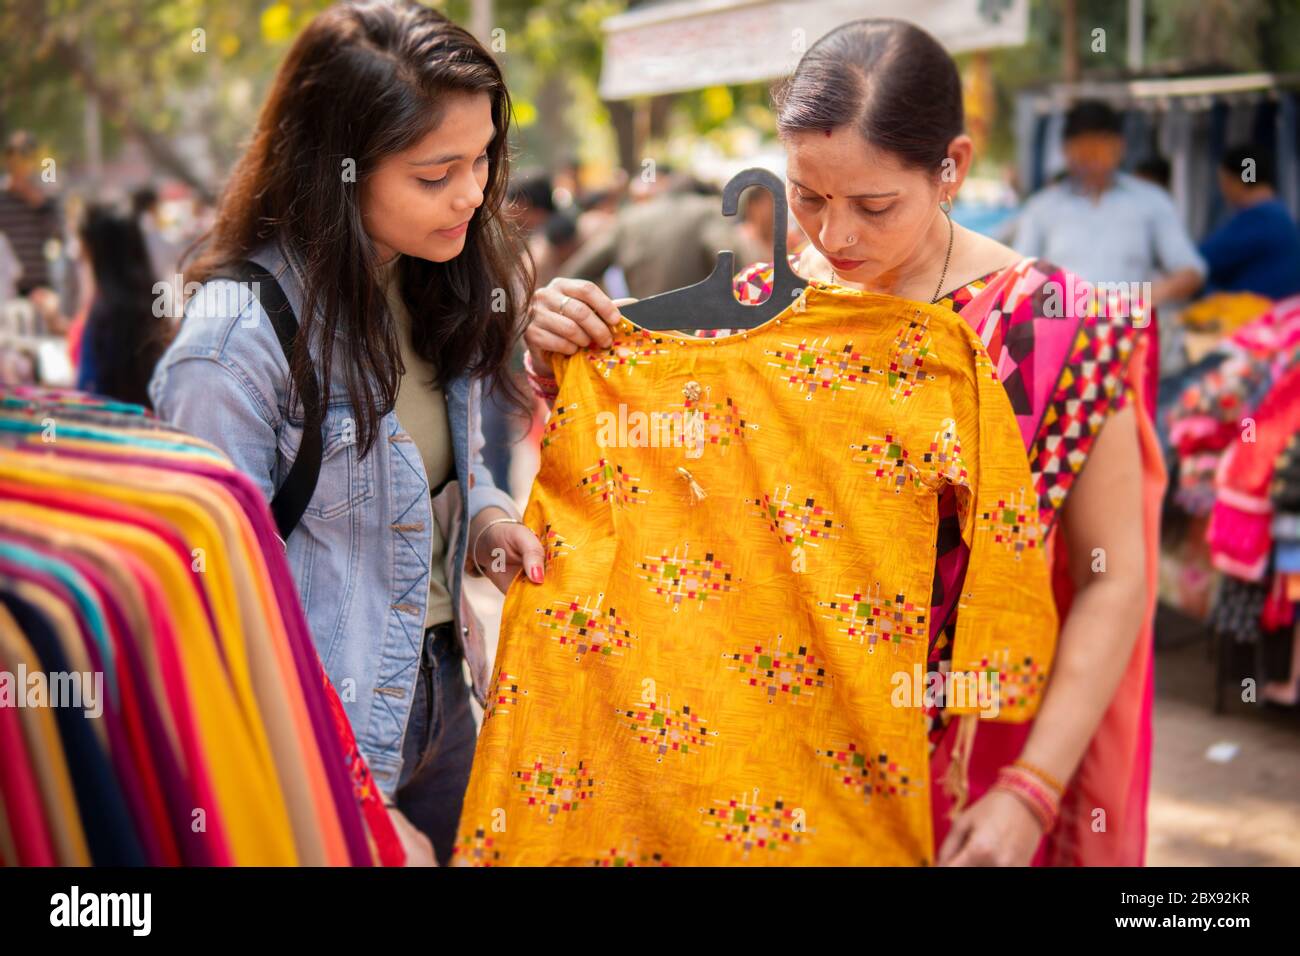 mother and daughter shopping together for clothes at outdoor street market. Stock Photo